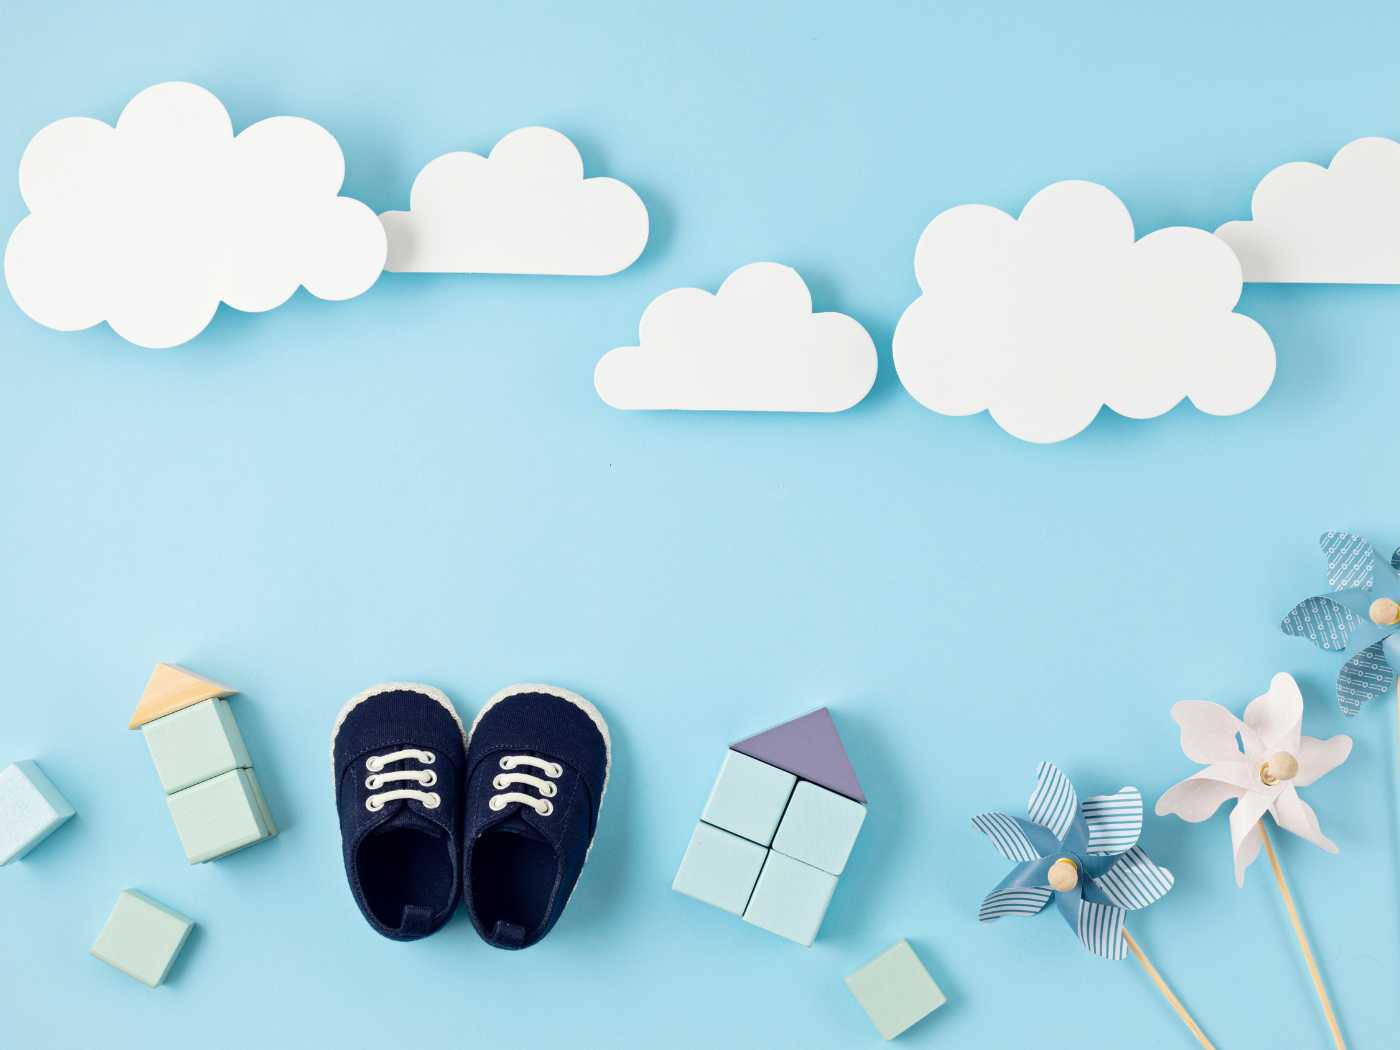 Creative gender reveal idea featuring a pair of navy blue baby shoes, wooden blocks, and pinwheels on a pastel blue background with white cloud cutouts, from the Gender Reveal Collection at Fabulous Flowers and Gifts.